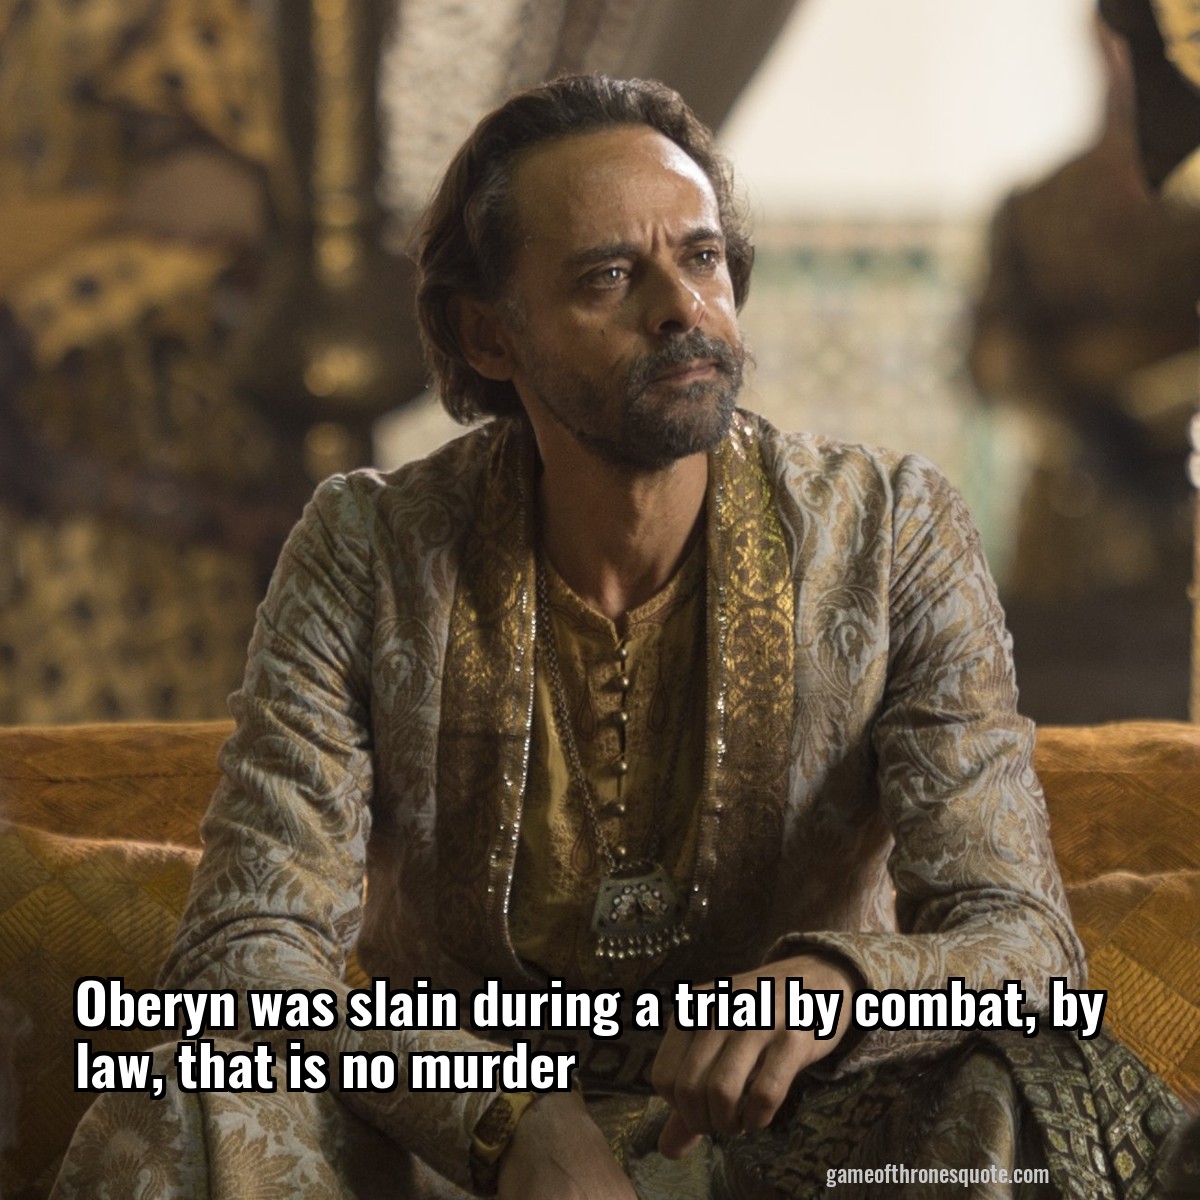 Oberyn was slain during a trial by combat, by law, that is no murder